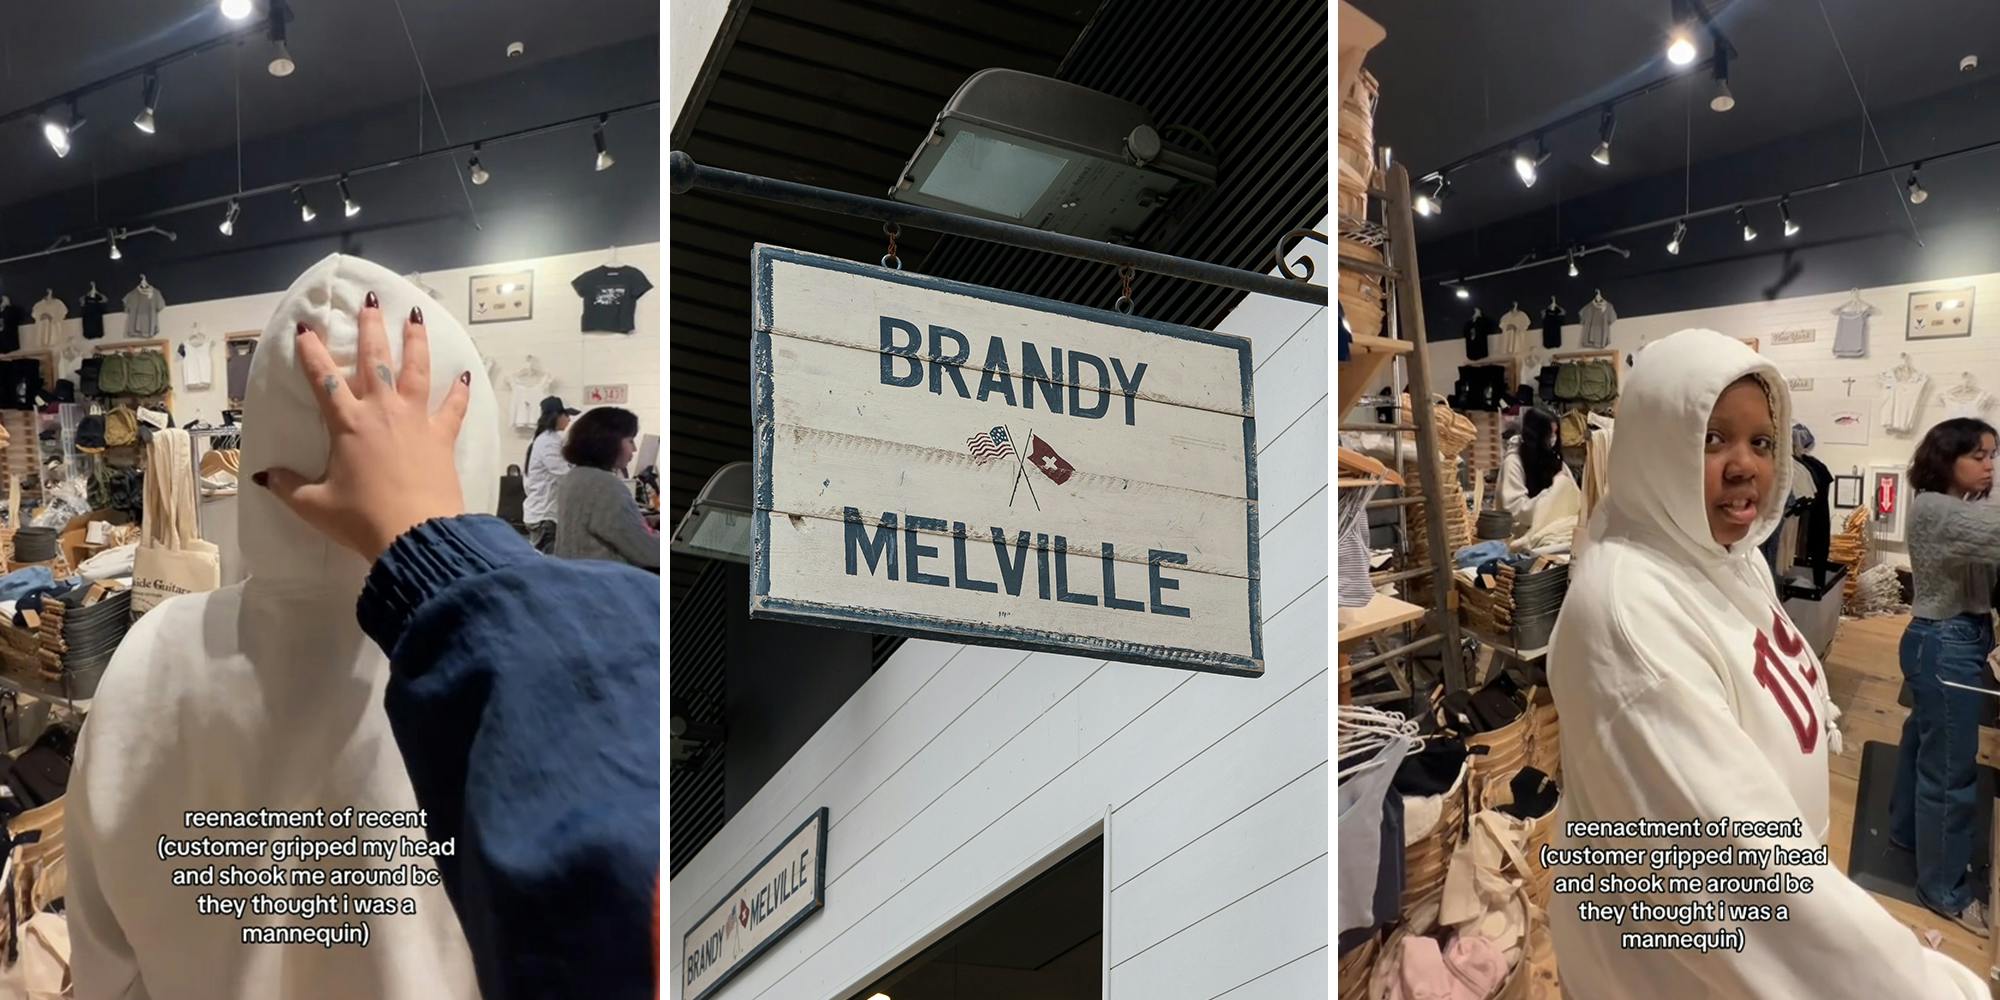 Brandy Melville worker shares what happened when a customer mistook her for a mannequin